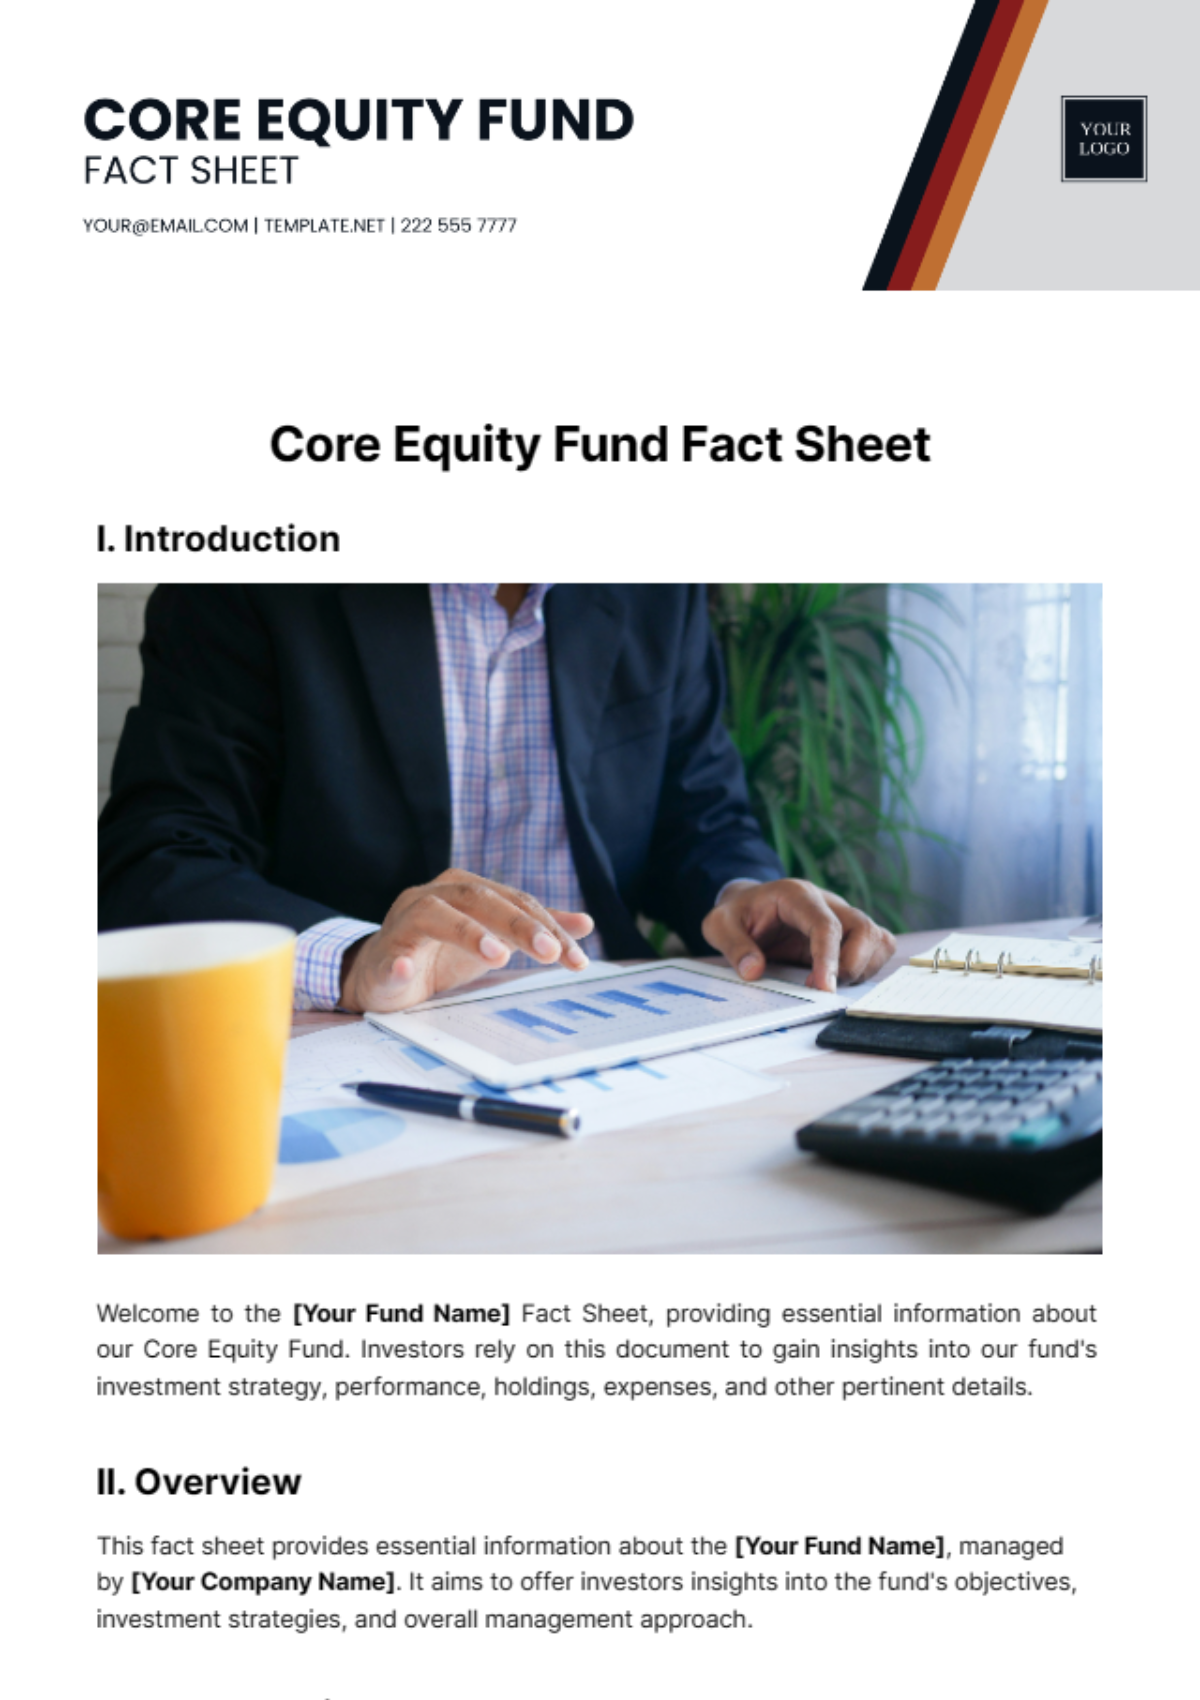 Core Equity Fund Fact Sheet Template